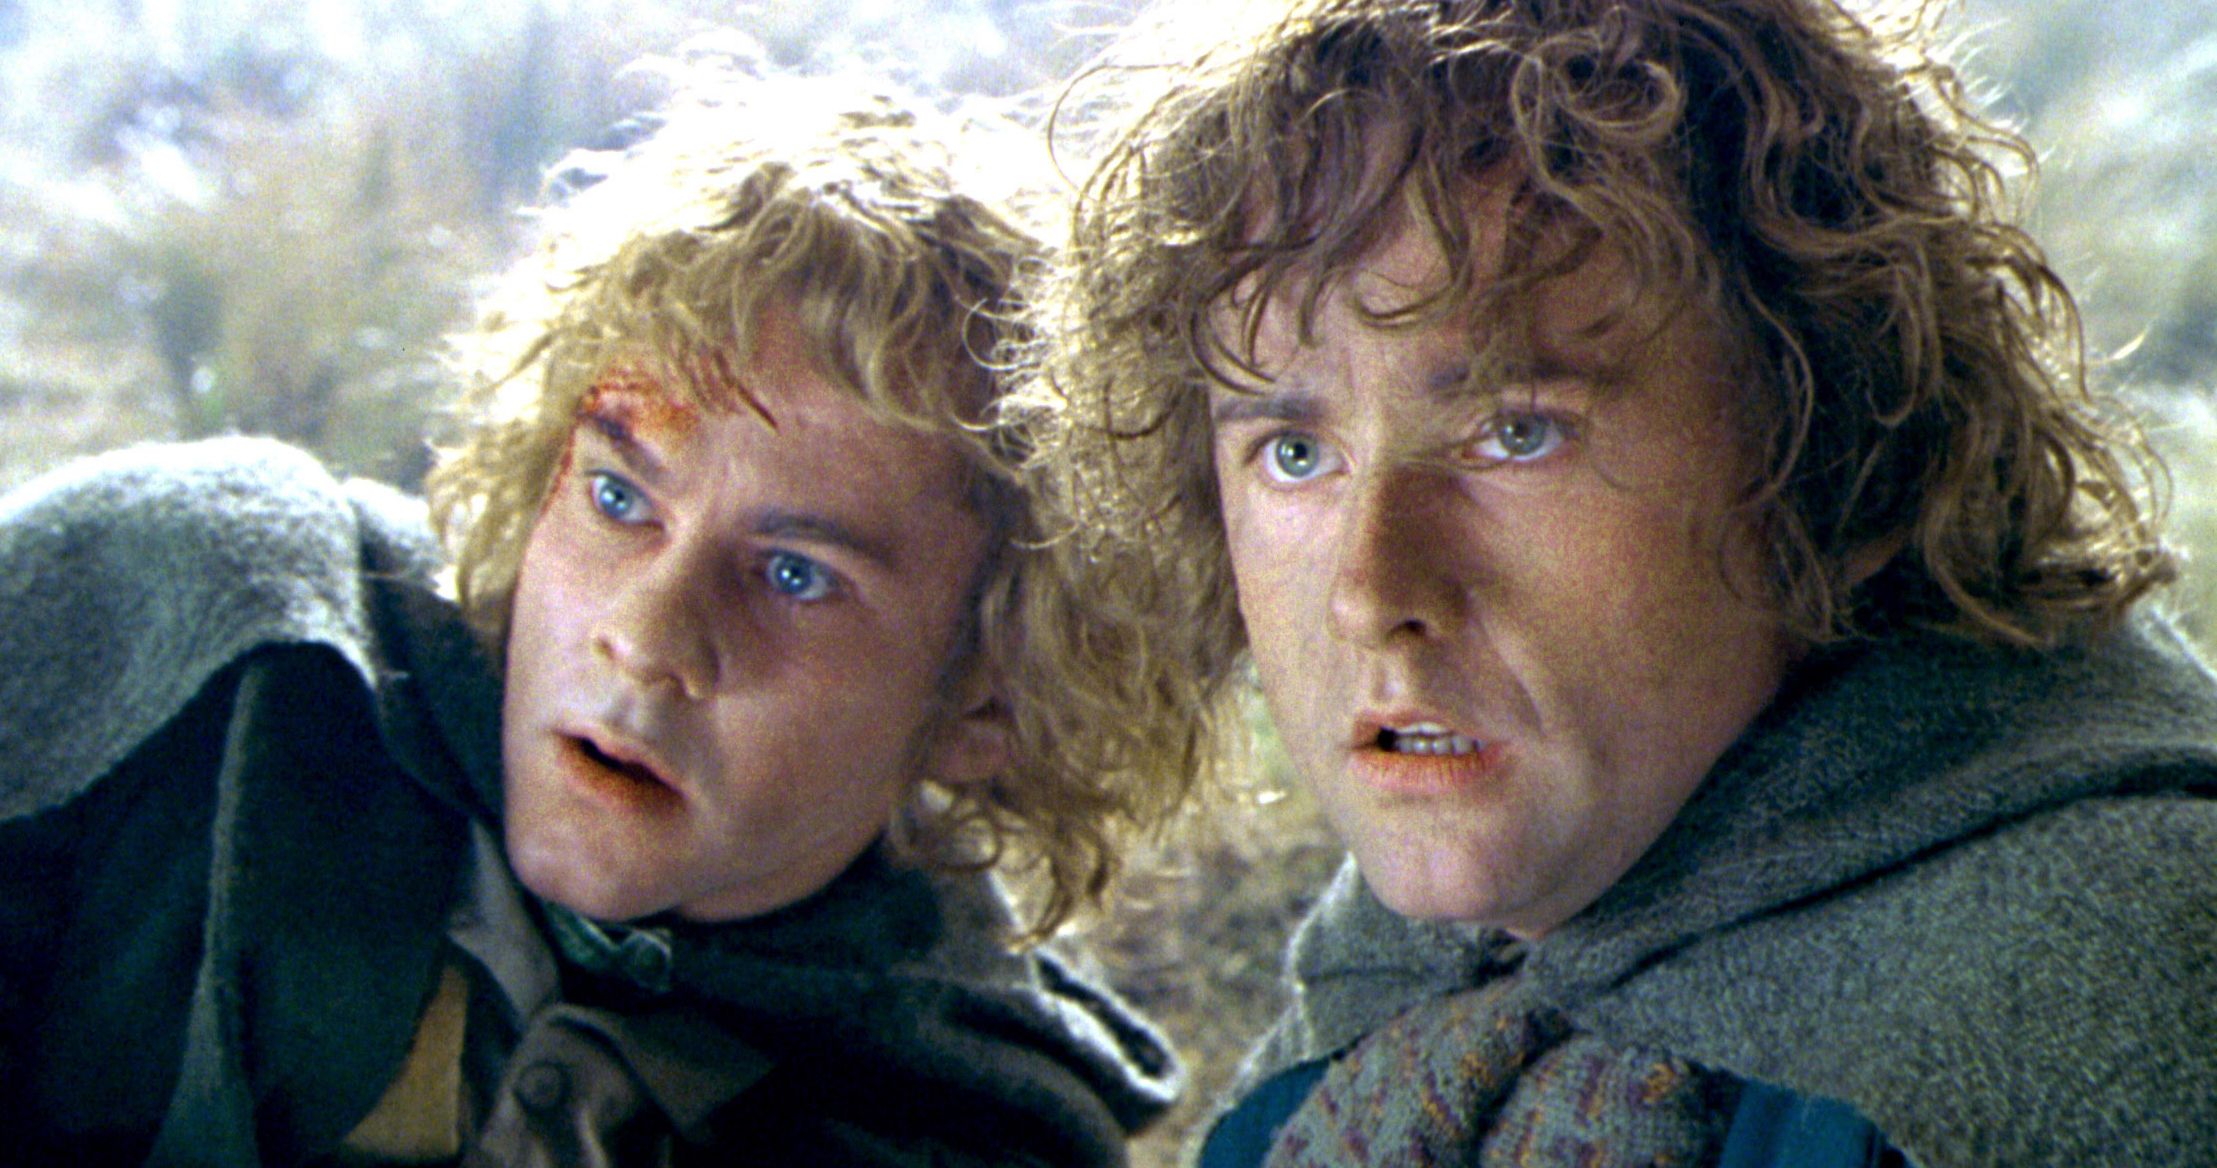 Lord of the Rings Podcast from Billy Boyd, Dominic Monaghan Will Relive Making the Trilogy